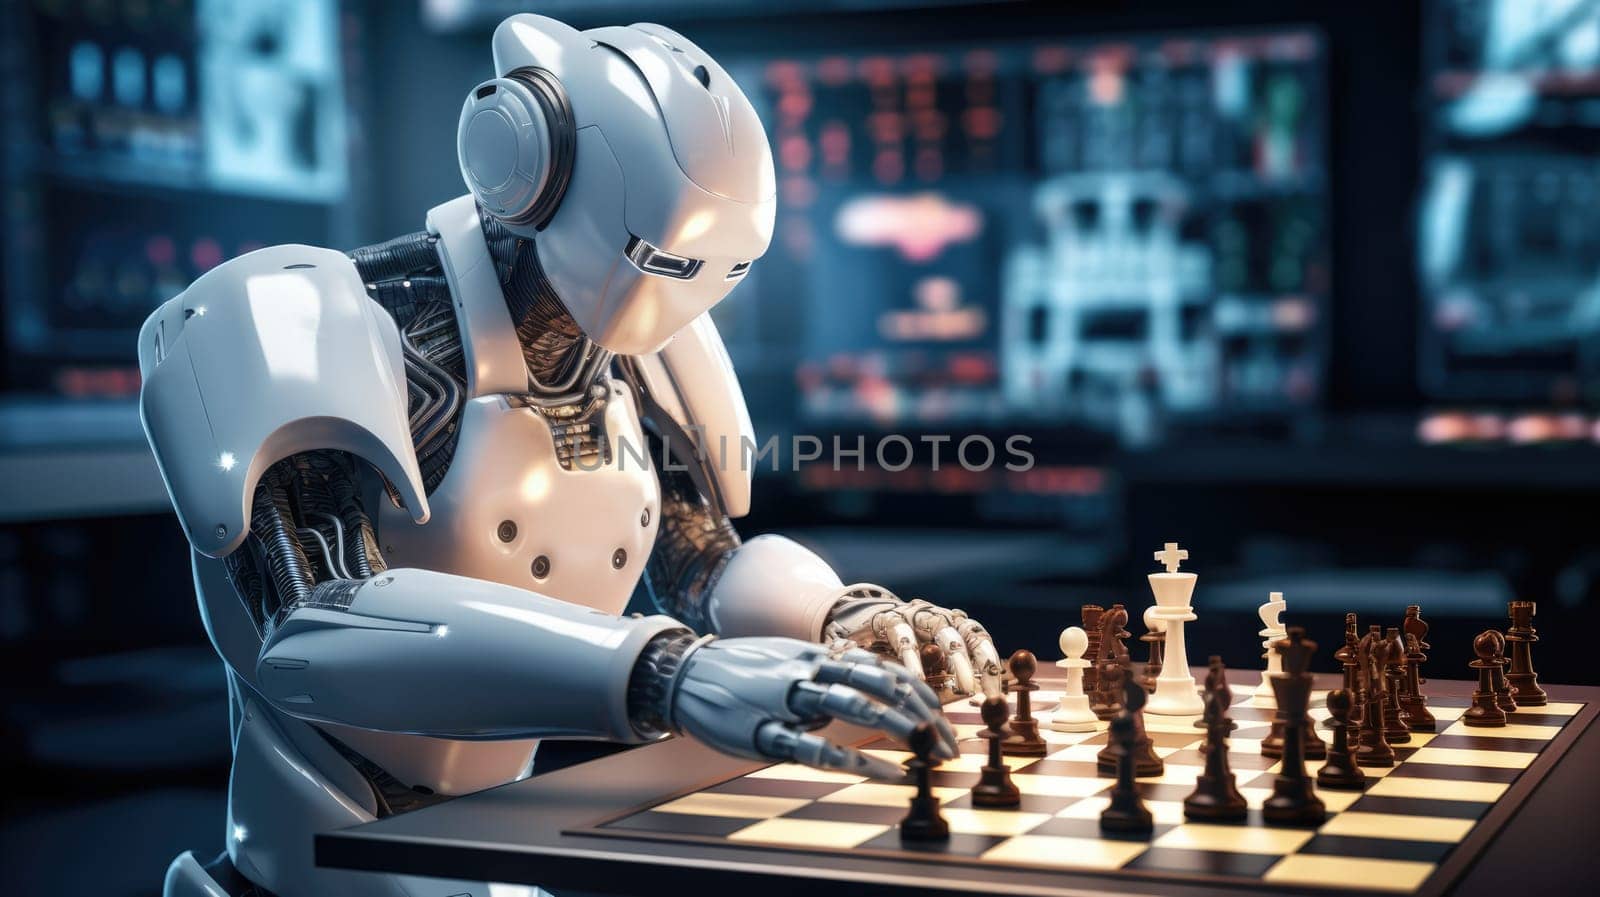 A gaming robot trained to play chess AI